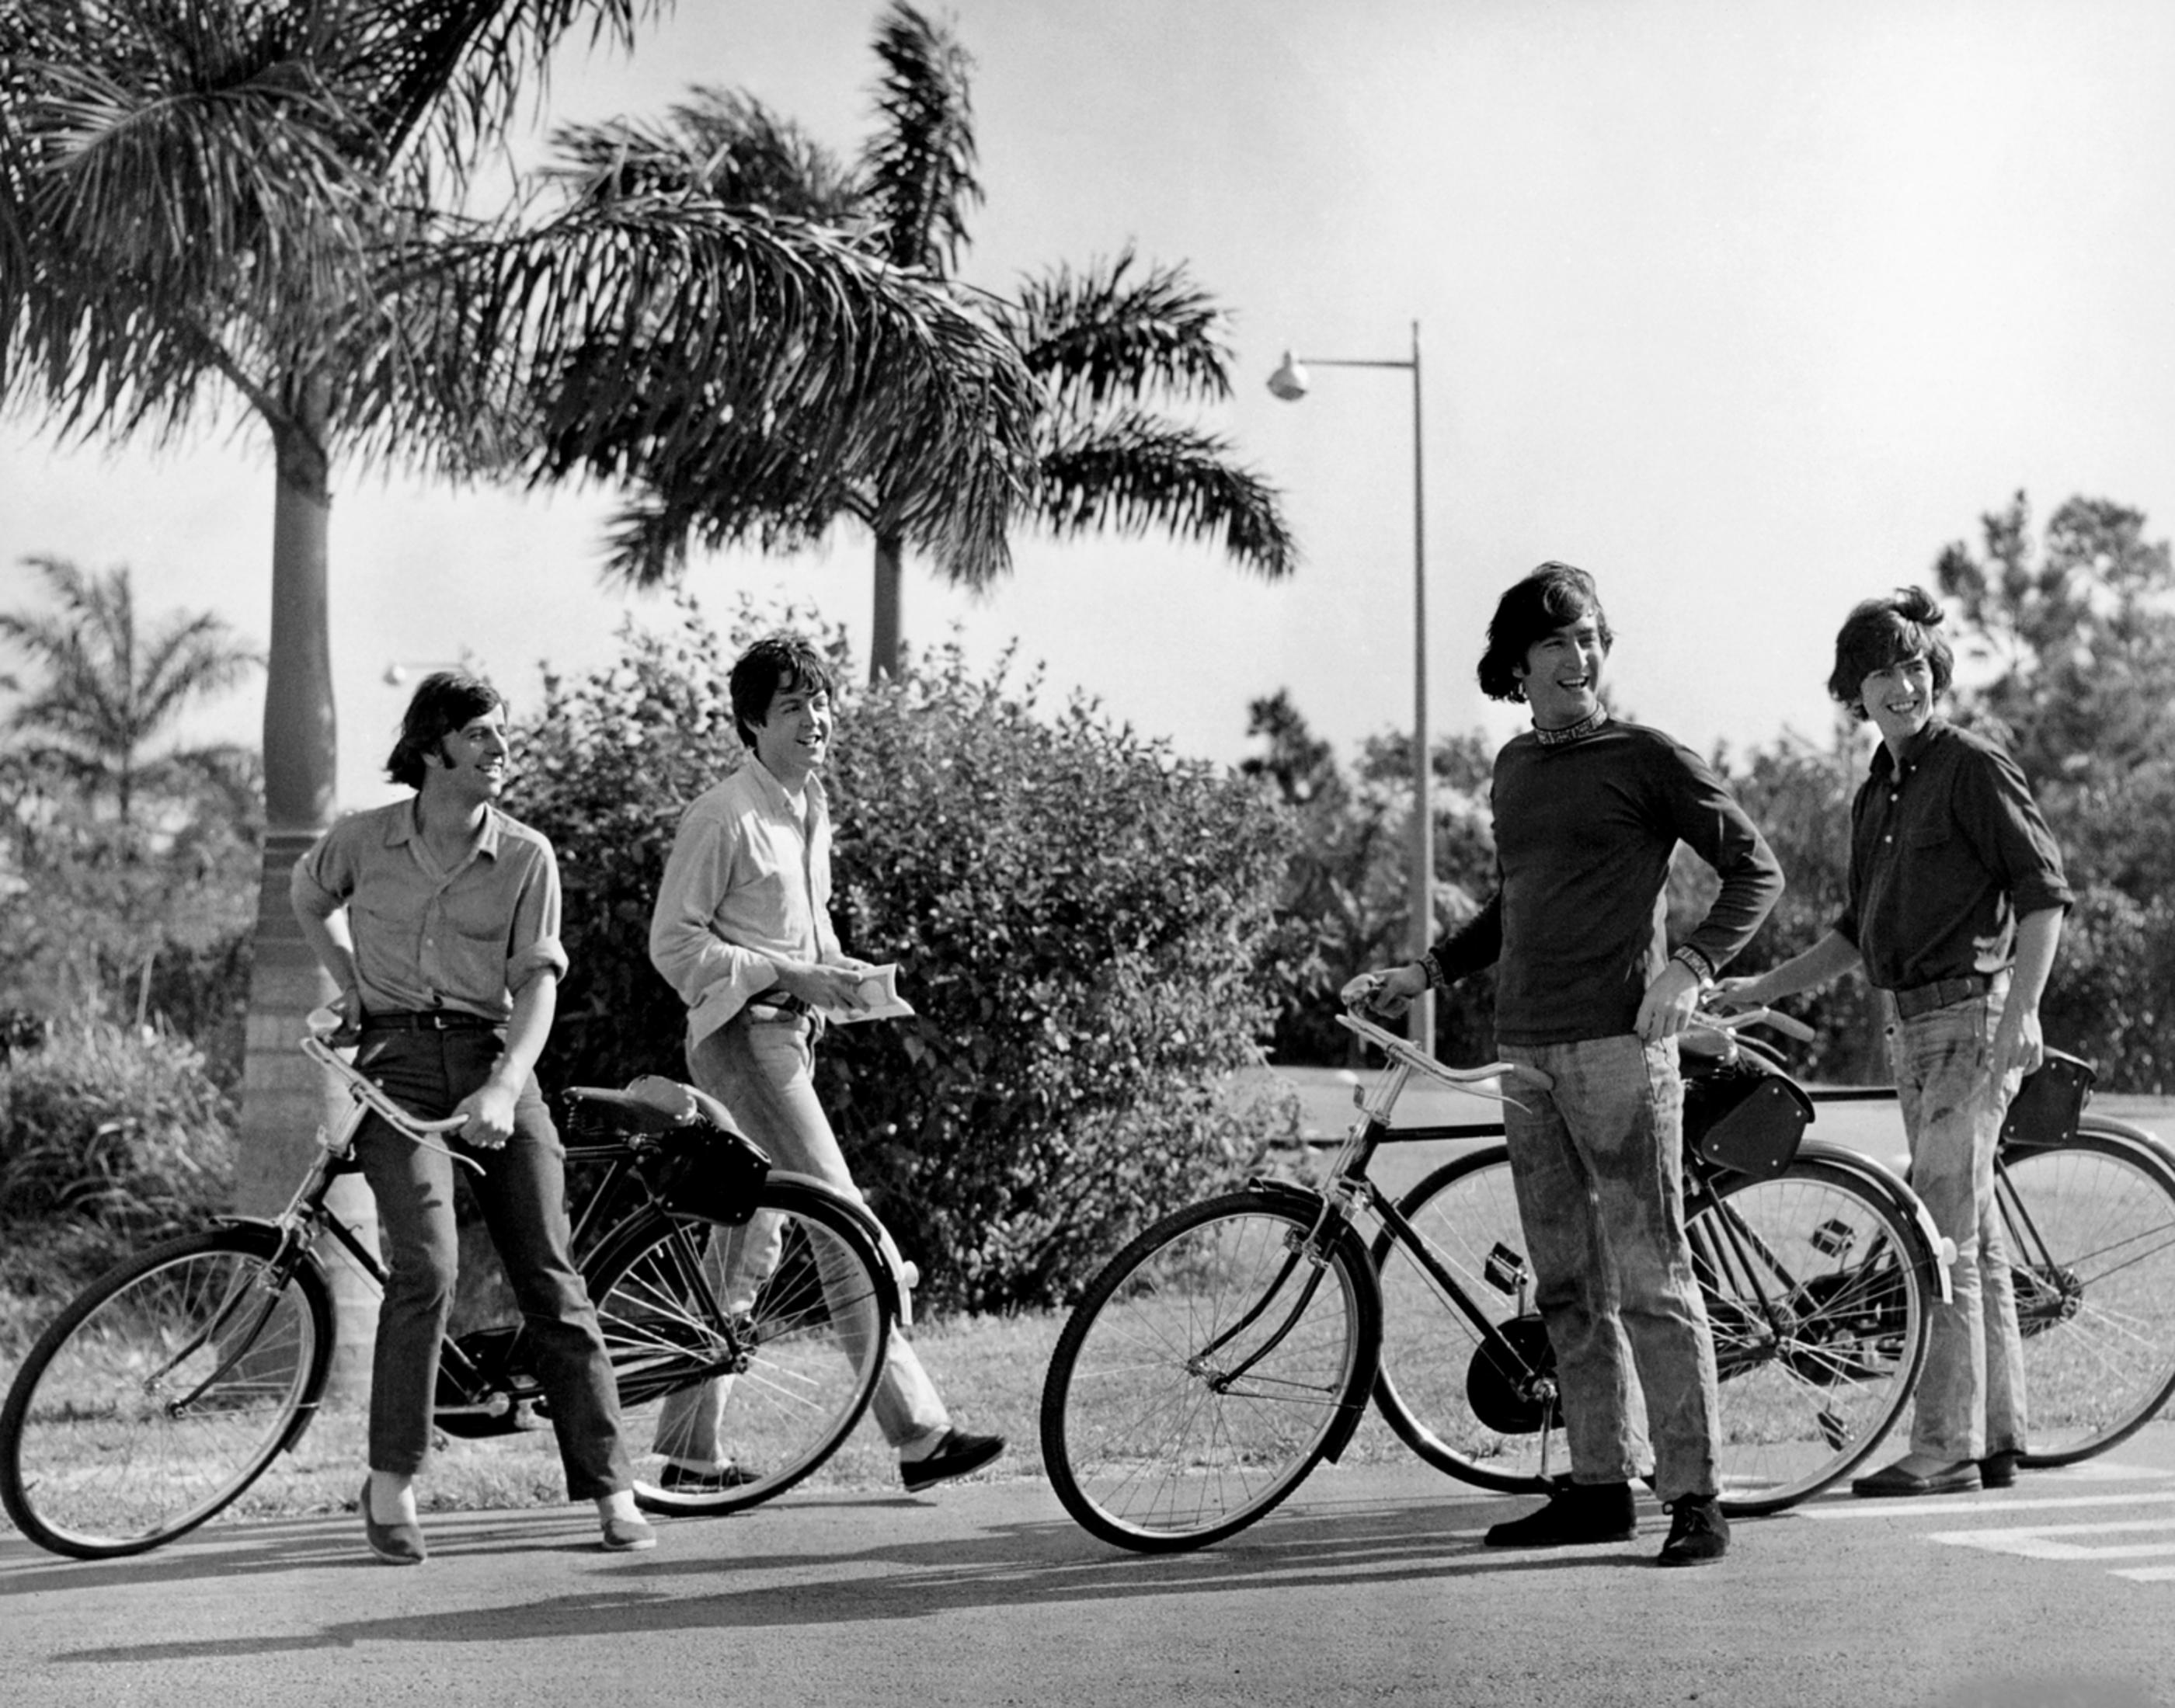 Unknown Black and White Photograph - Beatles on Bikes 24" x 20" Edition of 75